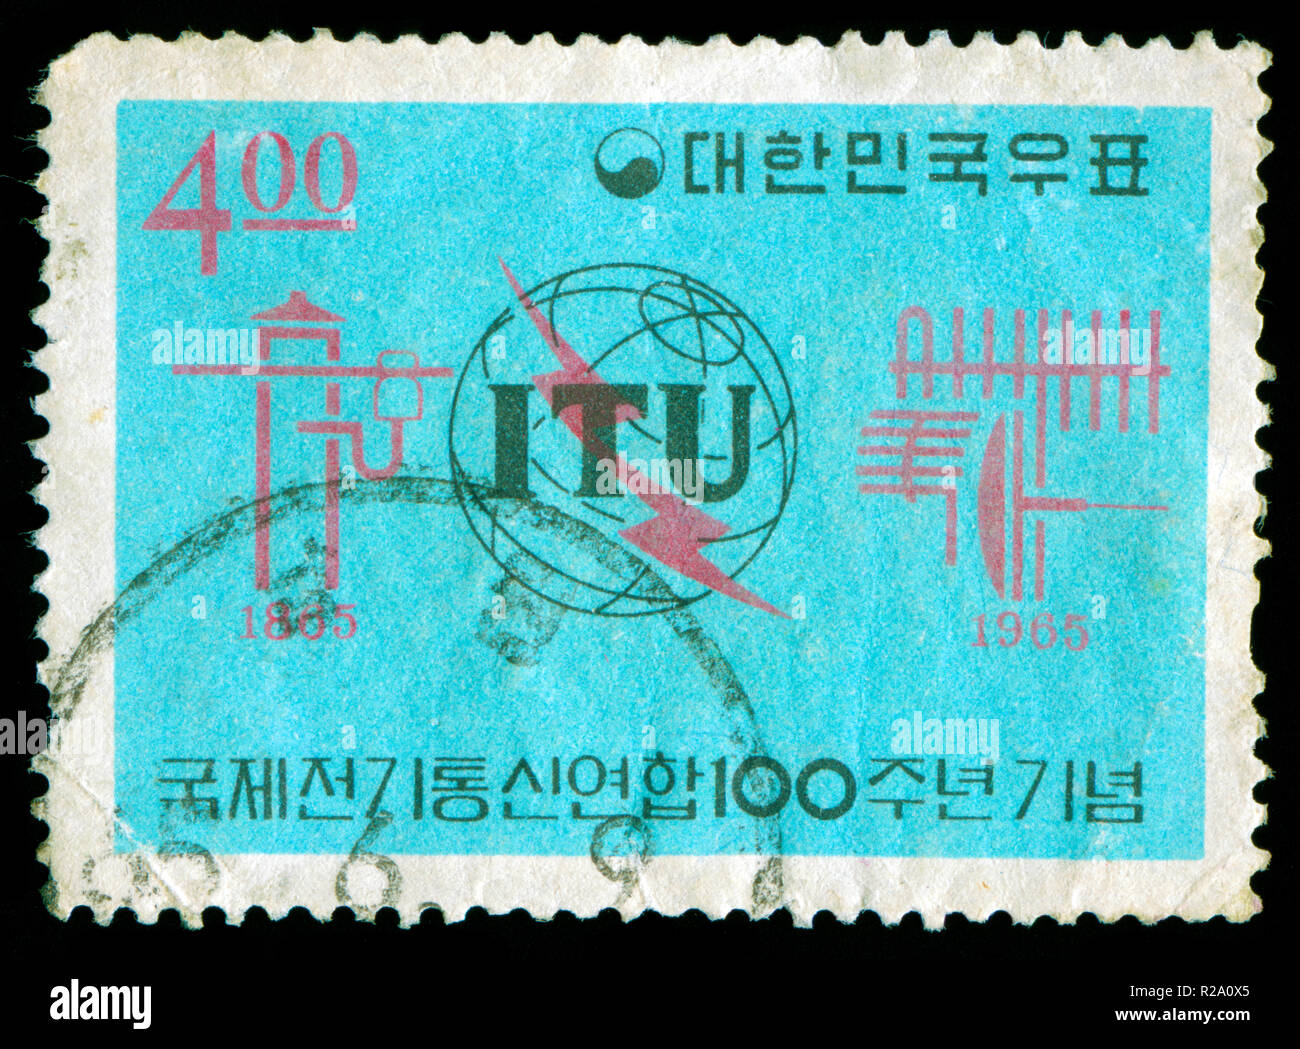 Postmarked stamp from South Korea in the I.T.U. (International Telecommunication Union), Centary series issued in 1965 Stock Photo